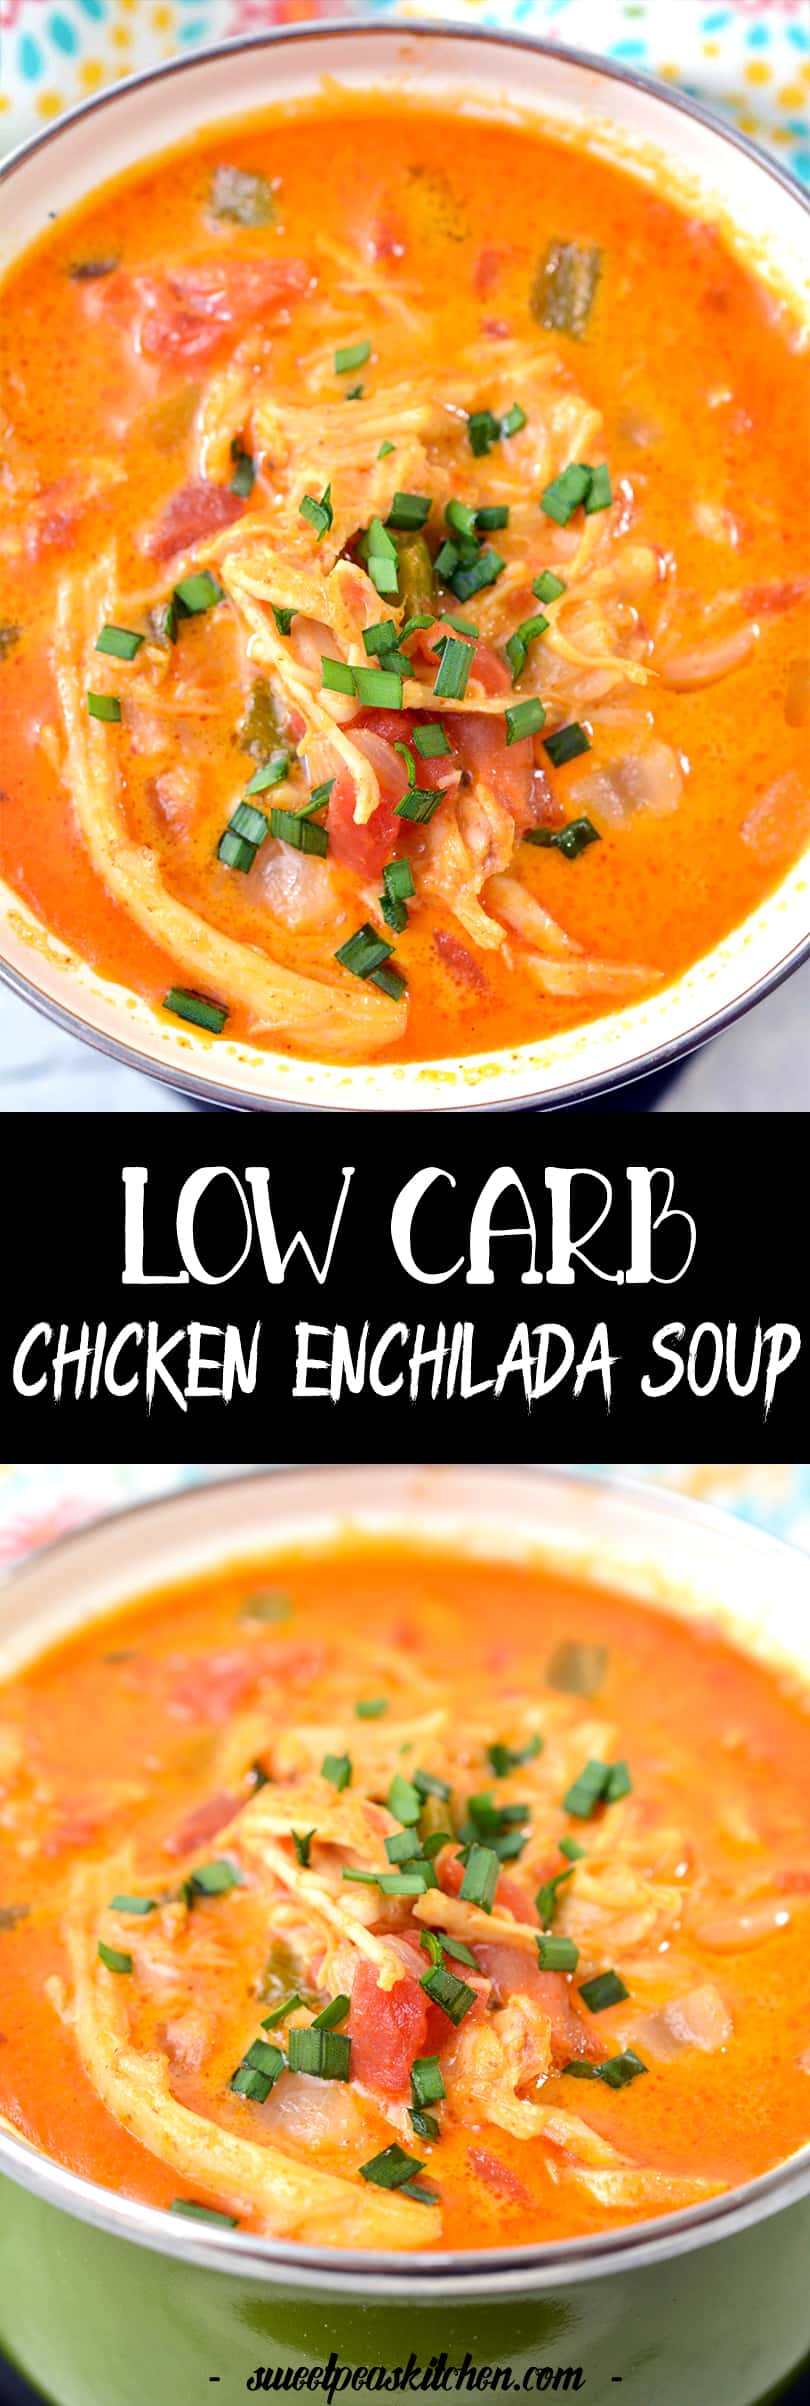 Low Carb Chicken Enchilada Soup on pinterest